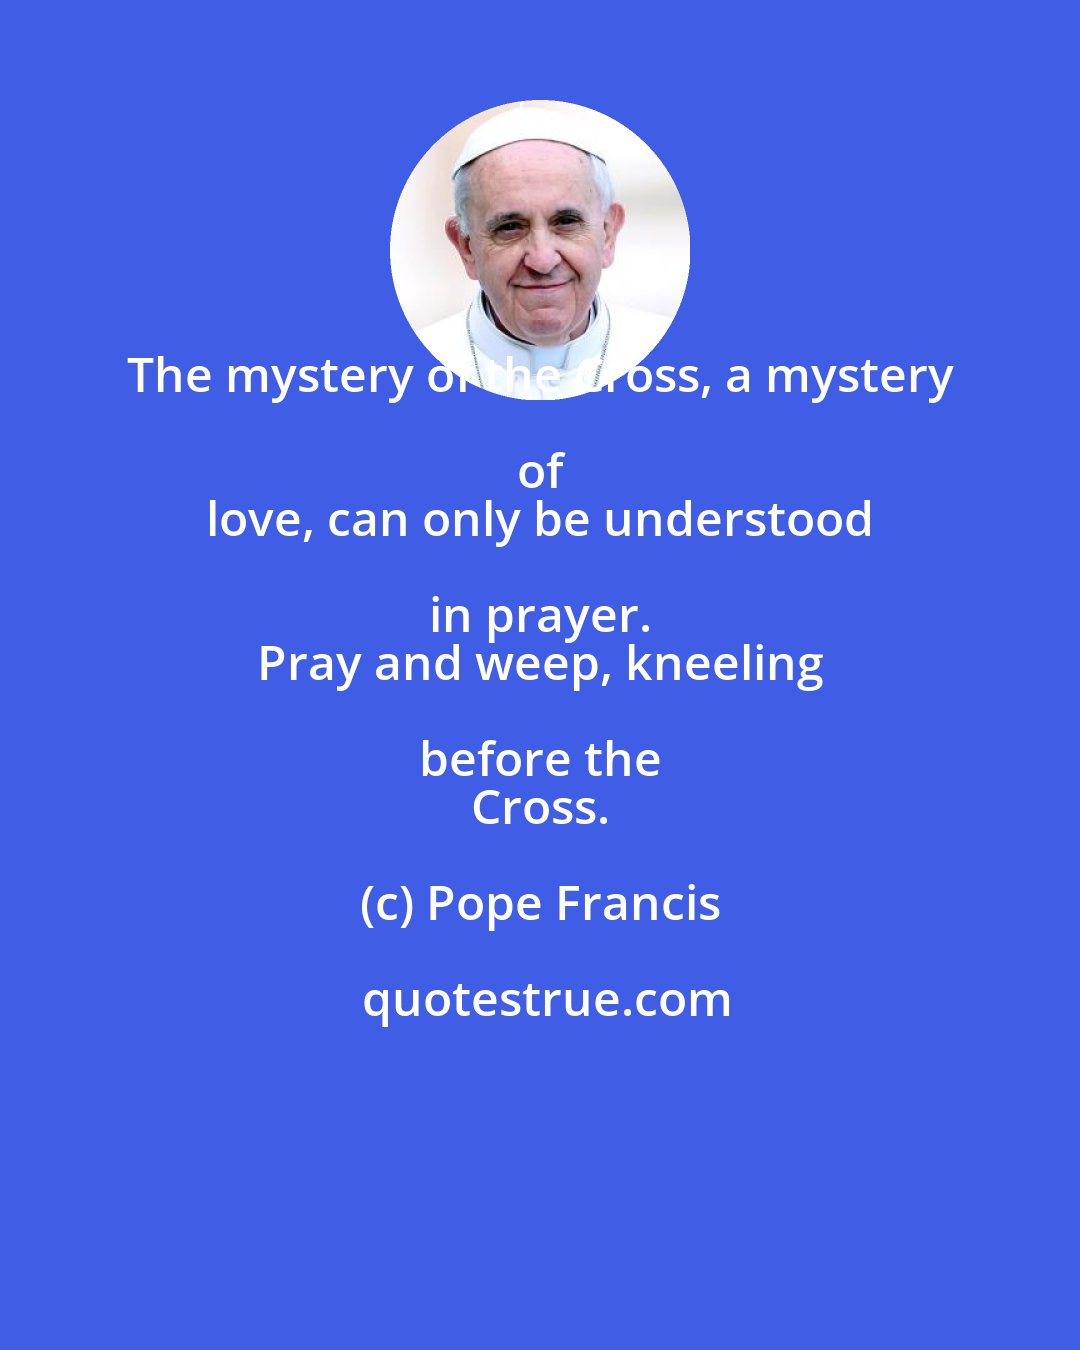 Pope Francis: The mystery of the Cross, a mystery of 
 love, can only be understood in prayer. 
 Pray and weep, kneeling before the 
 Cross.